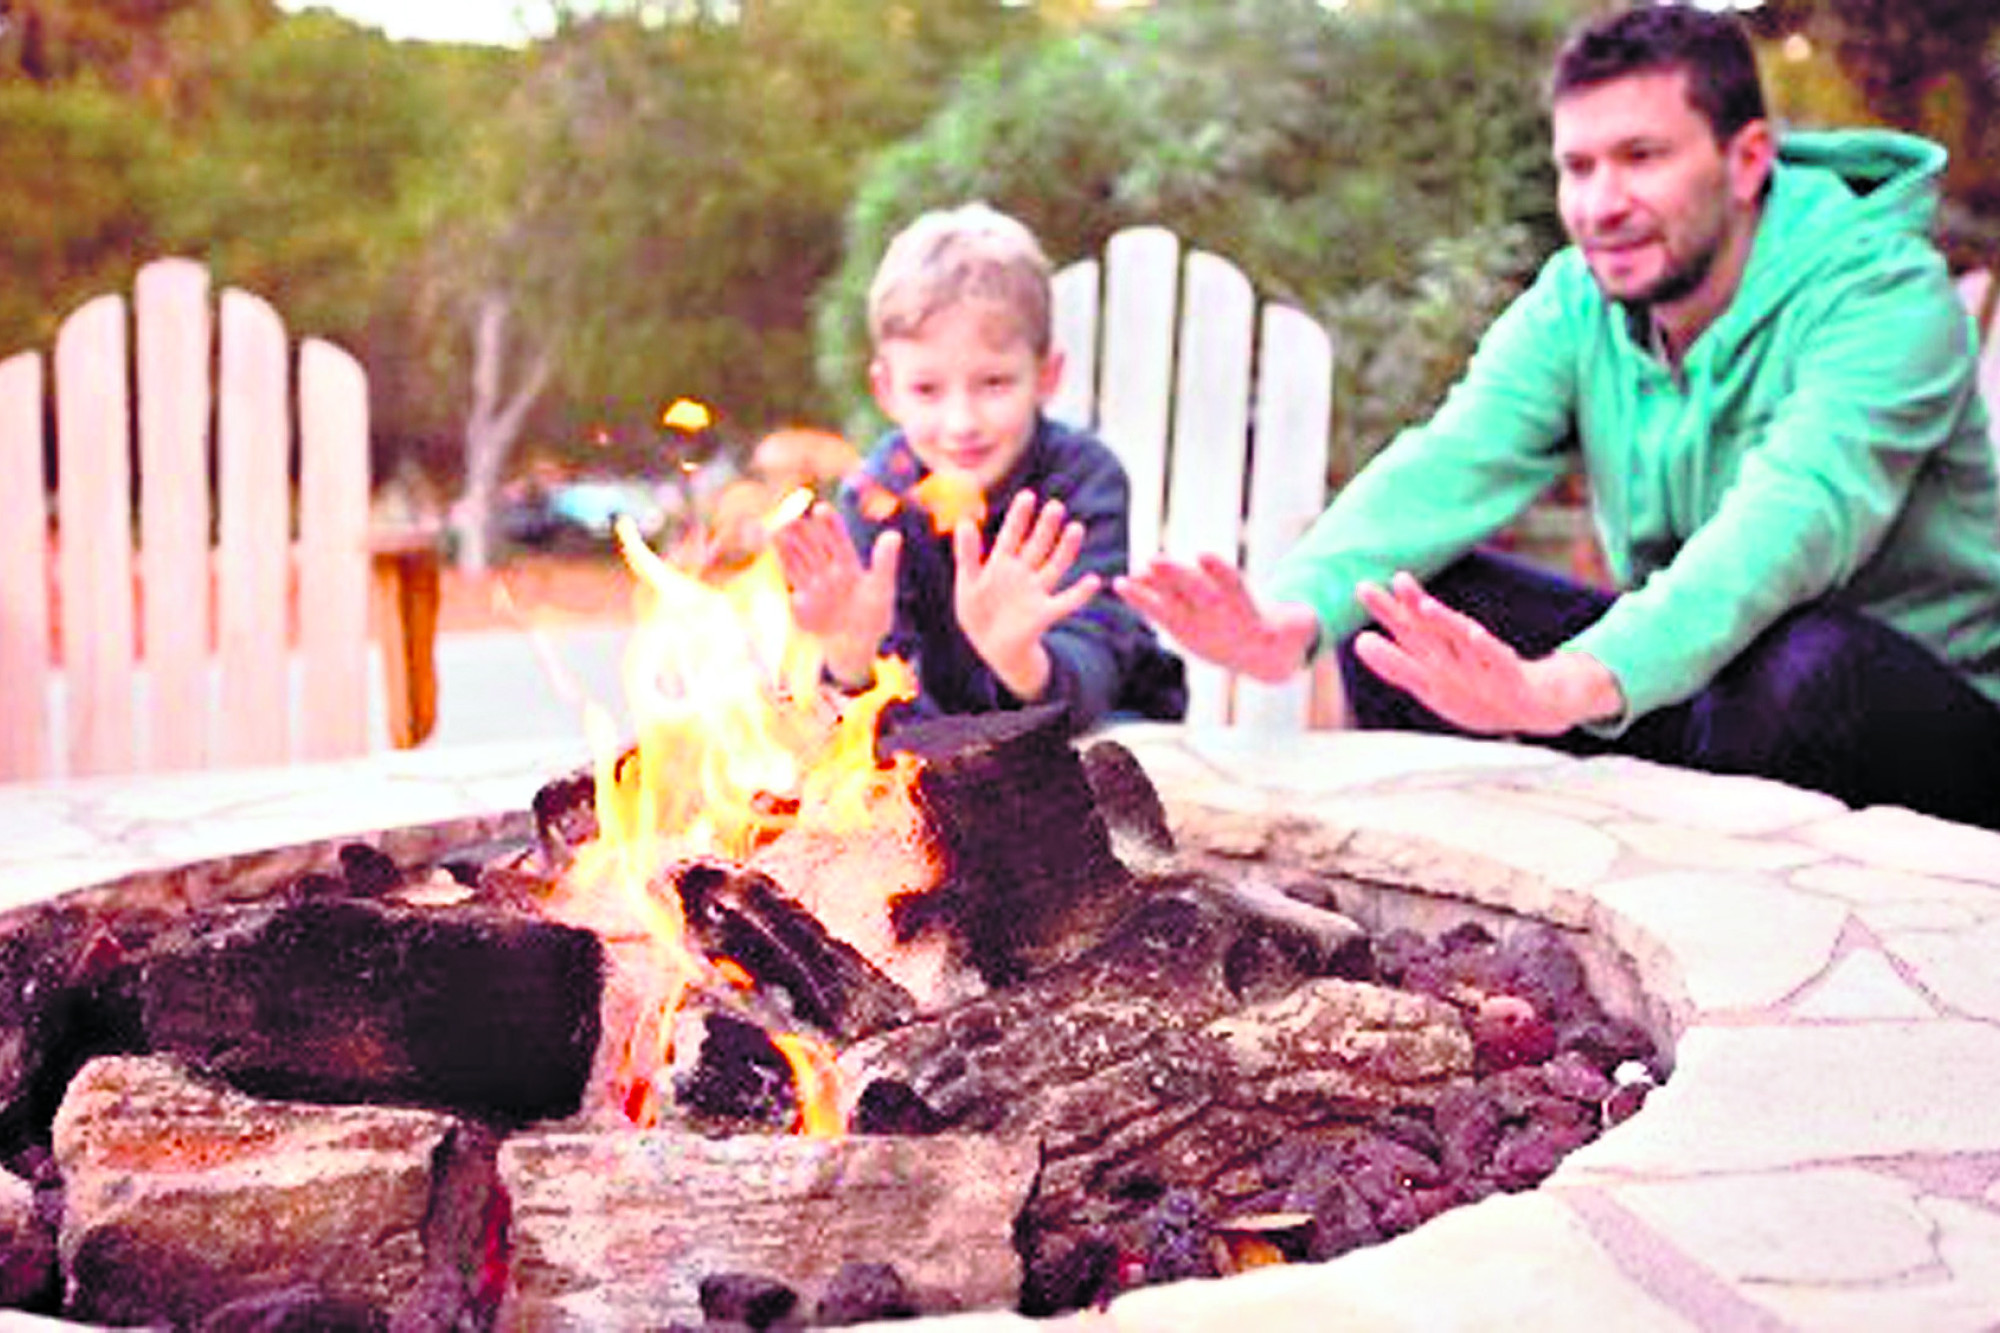 Backyard fires - Hot stuff? Or the absolute pits? Moreton Bay Regional Council Local Laws Review - Put your case forward on this and many other issues now